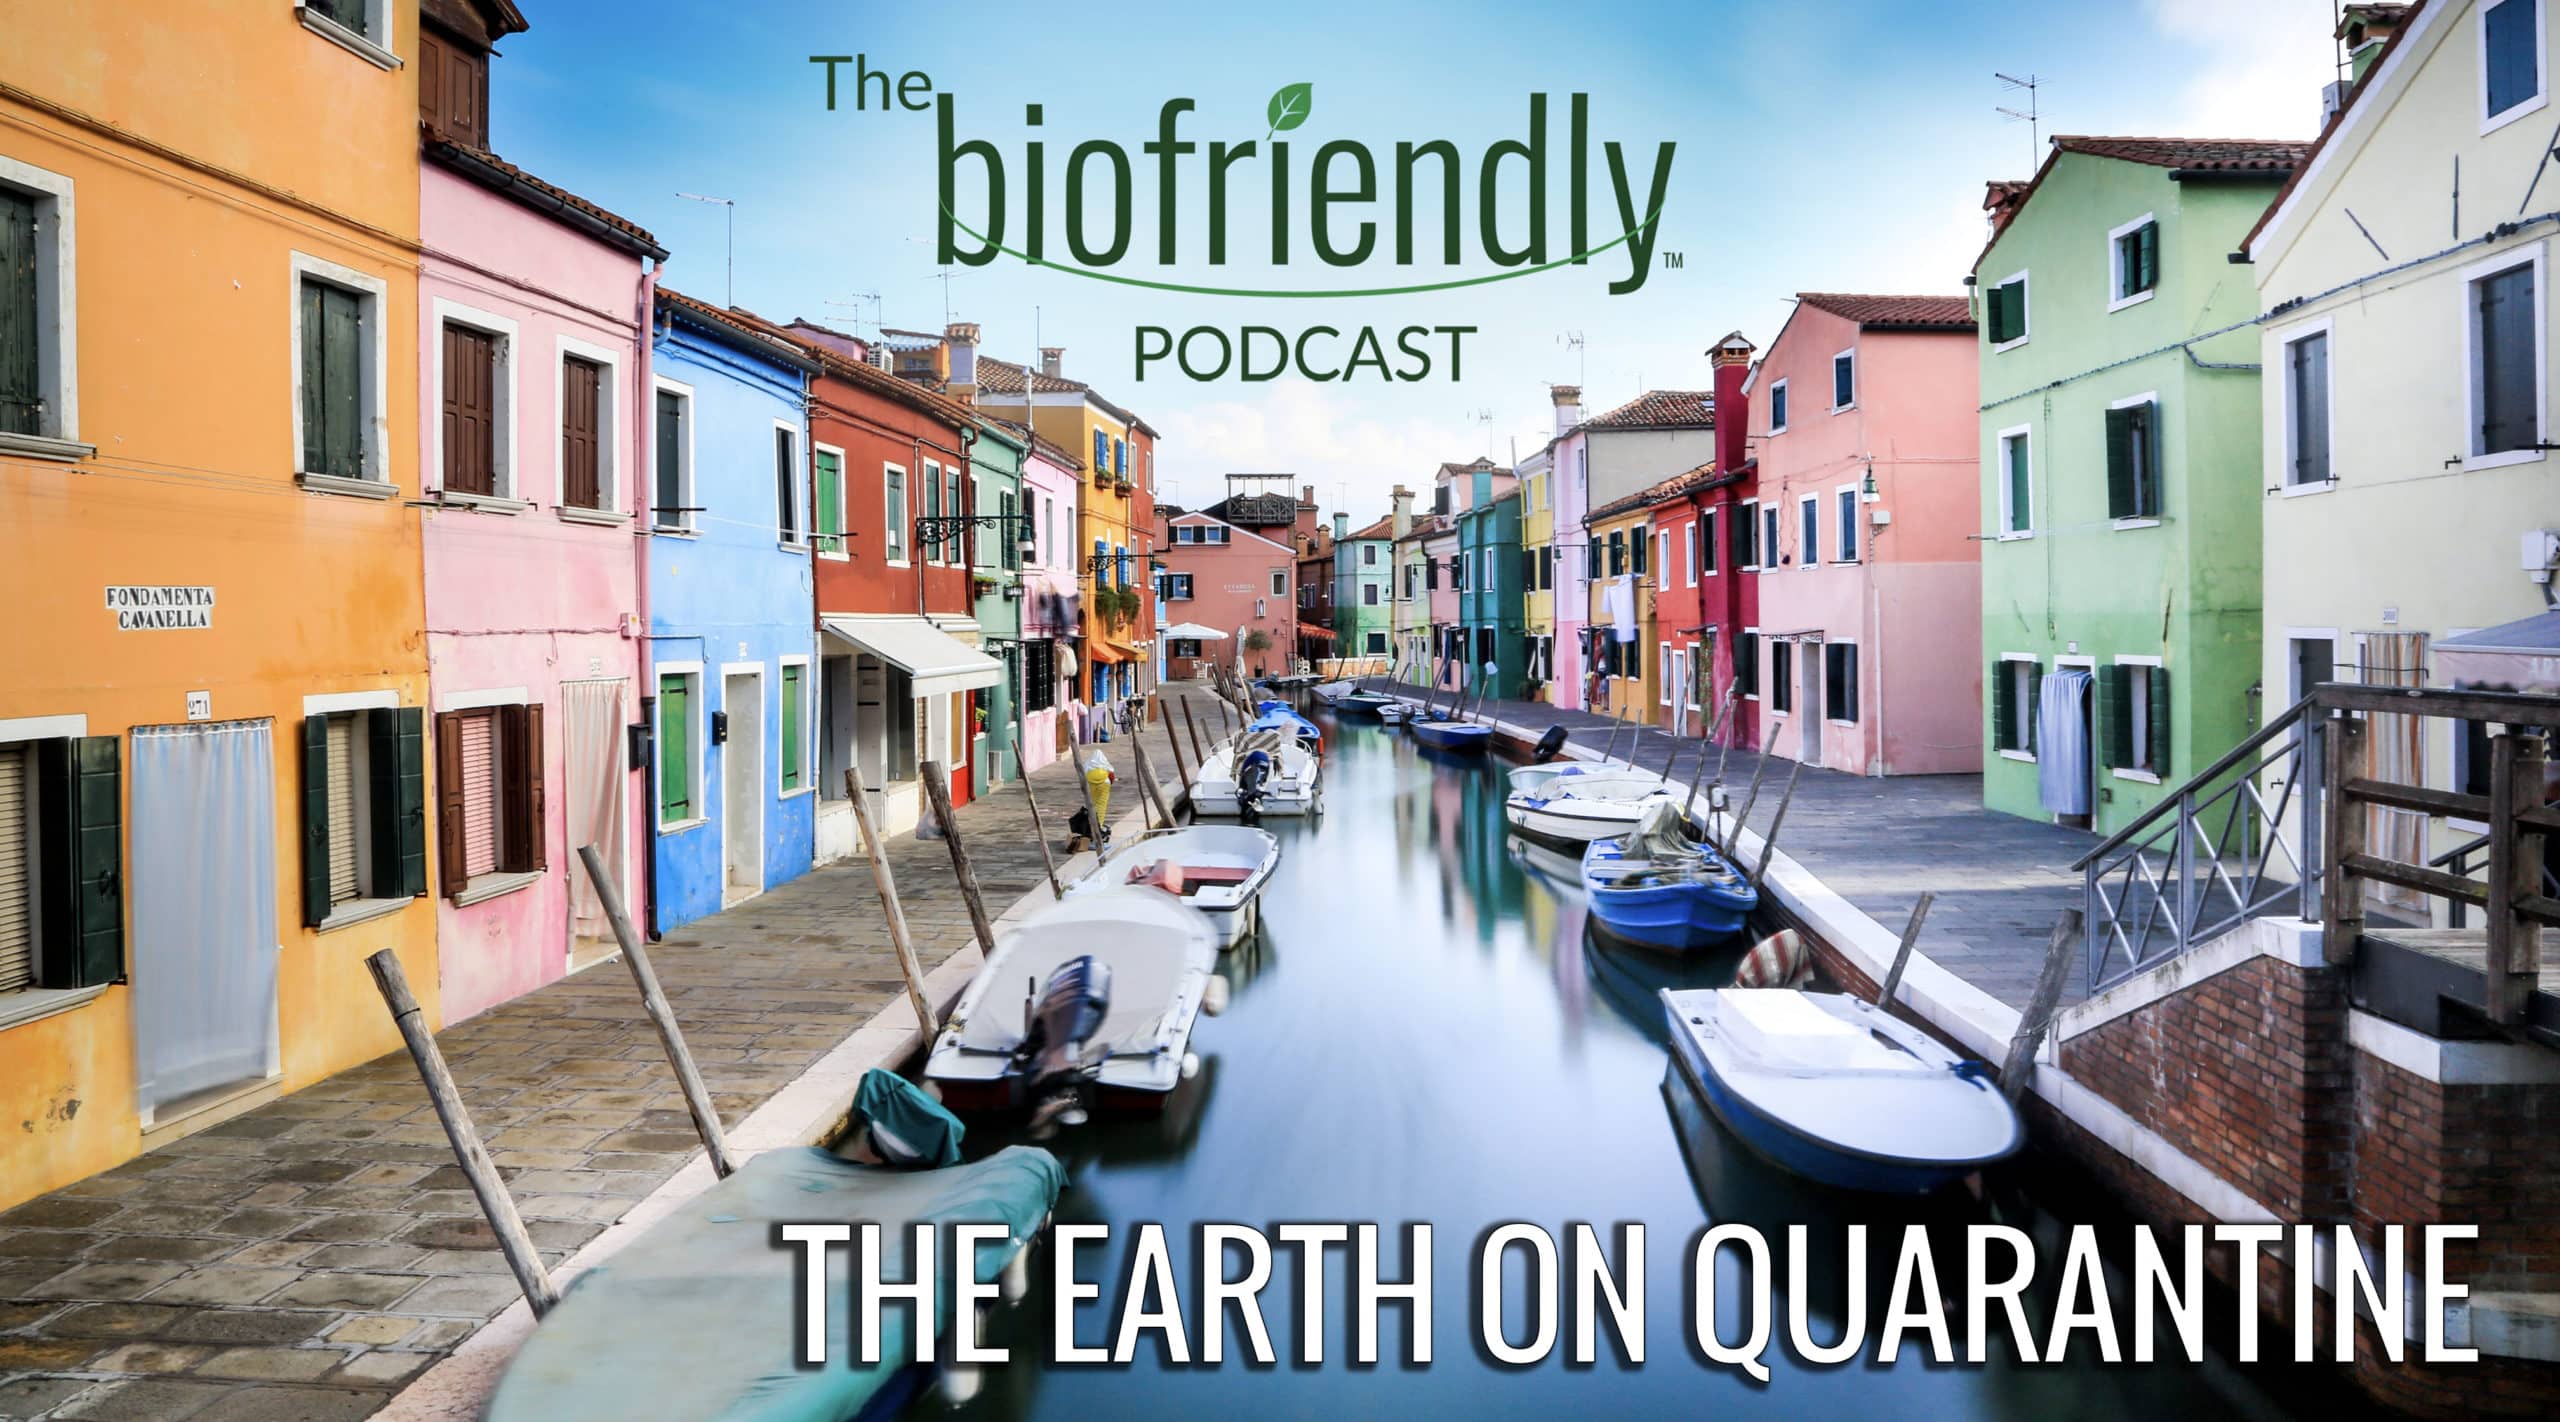 The Biofriendly Podcast - Episode 57 - The Earth On Quarantine